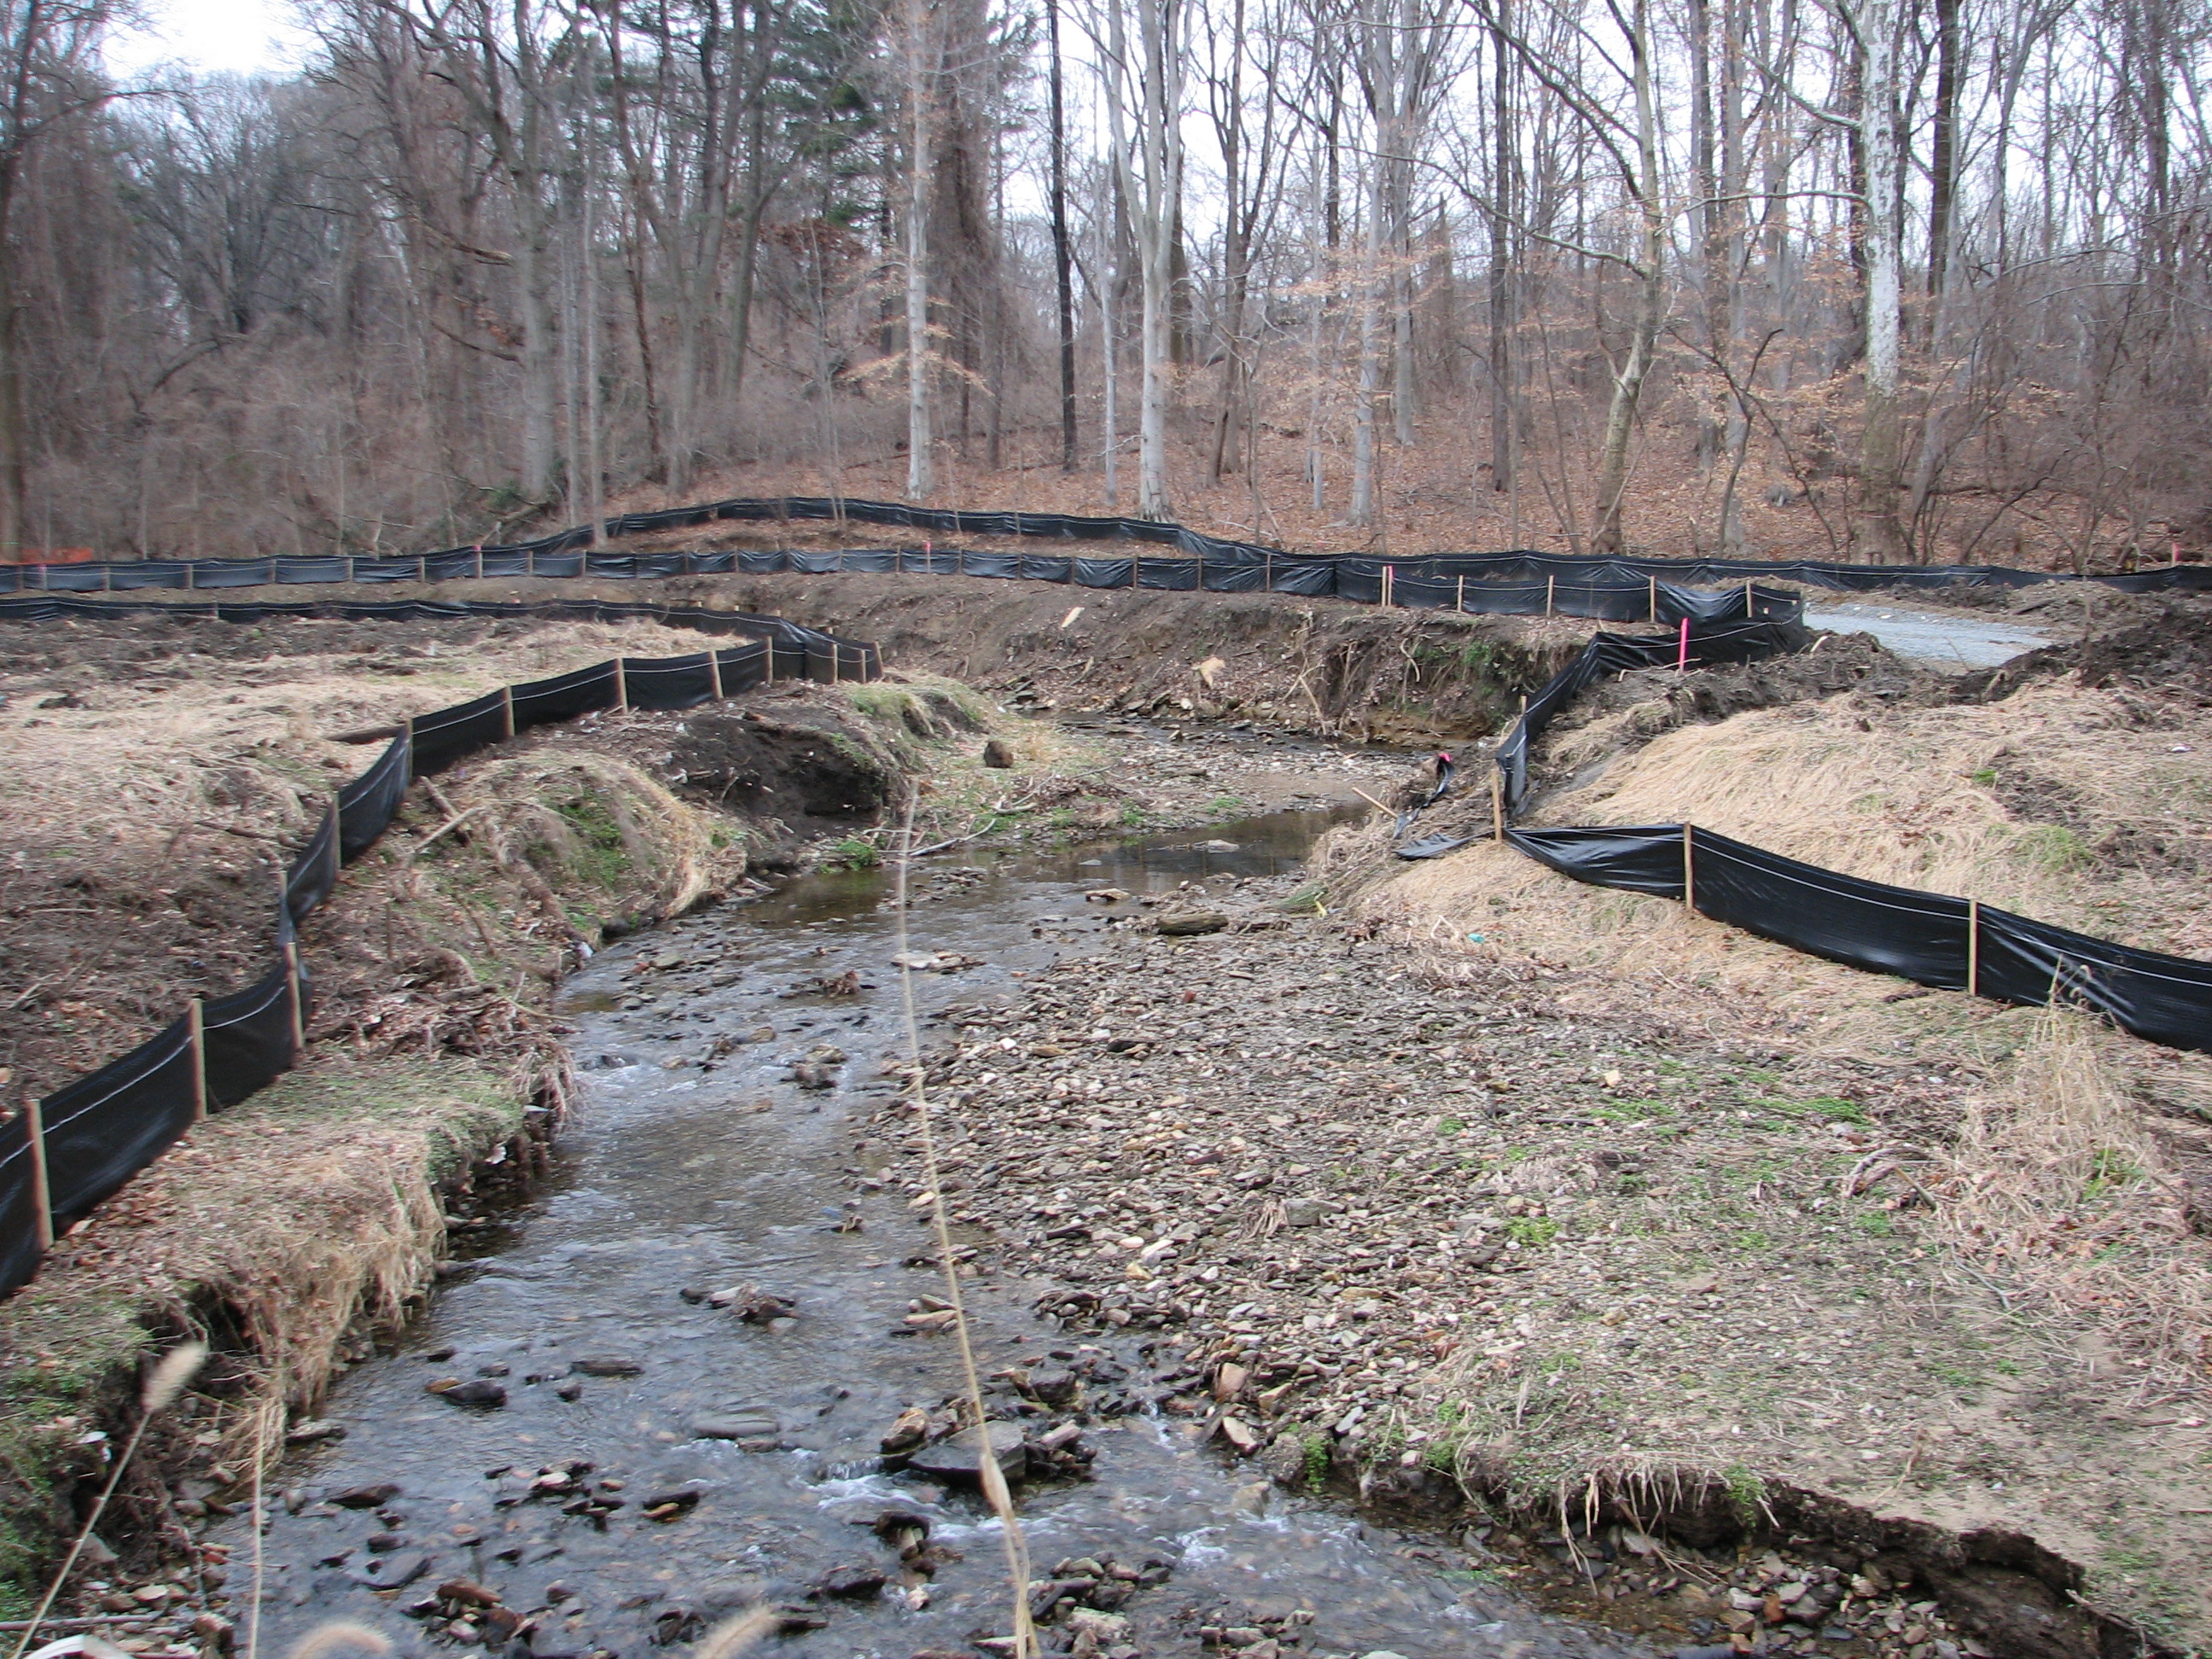 The West Branch of Indian Creek, upstream from the culvert